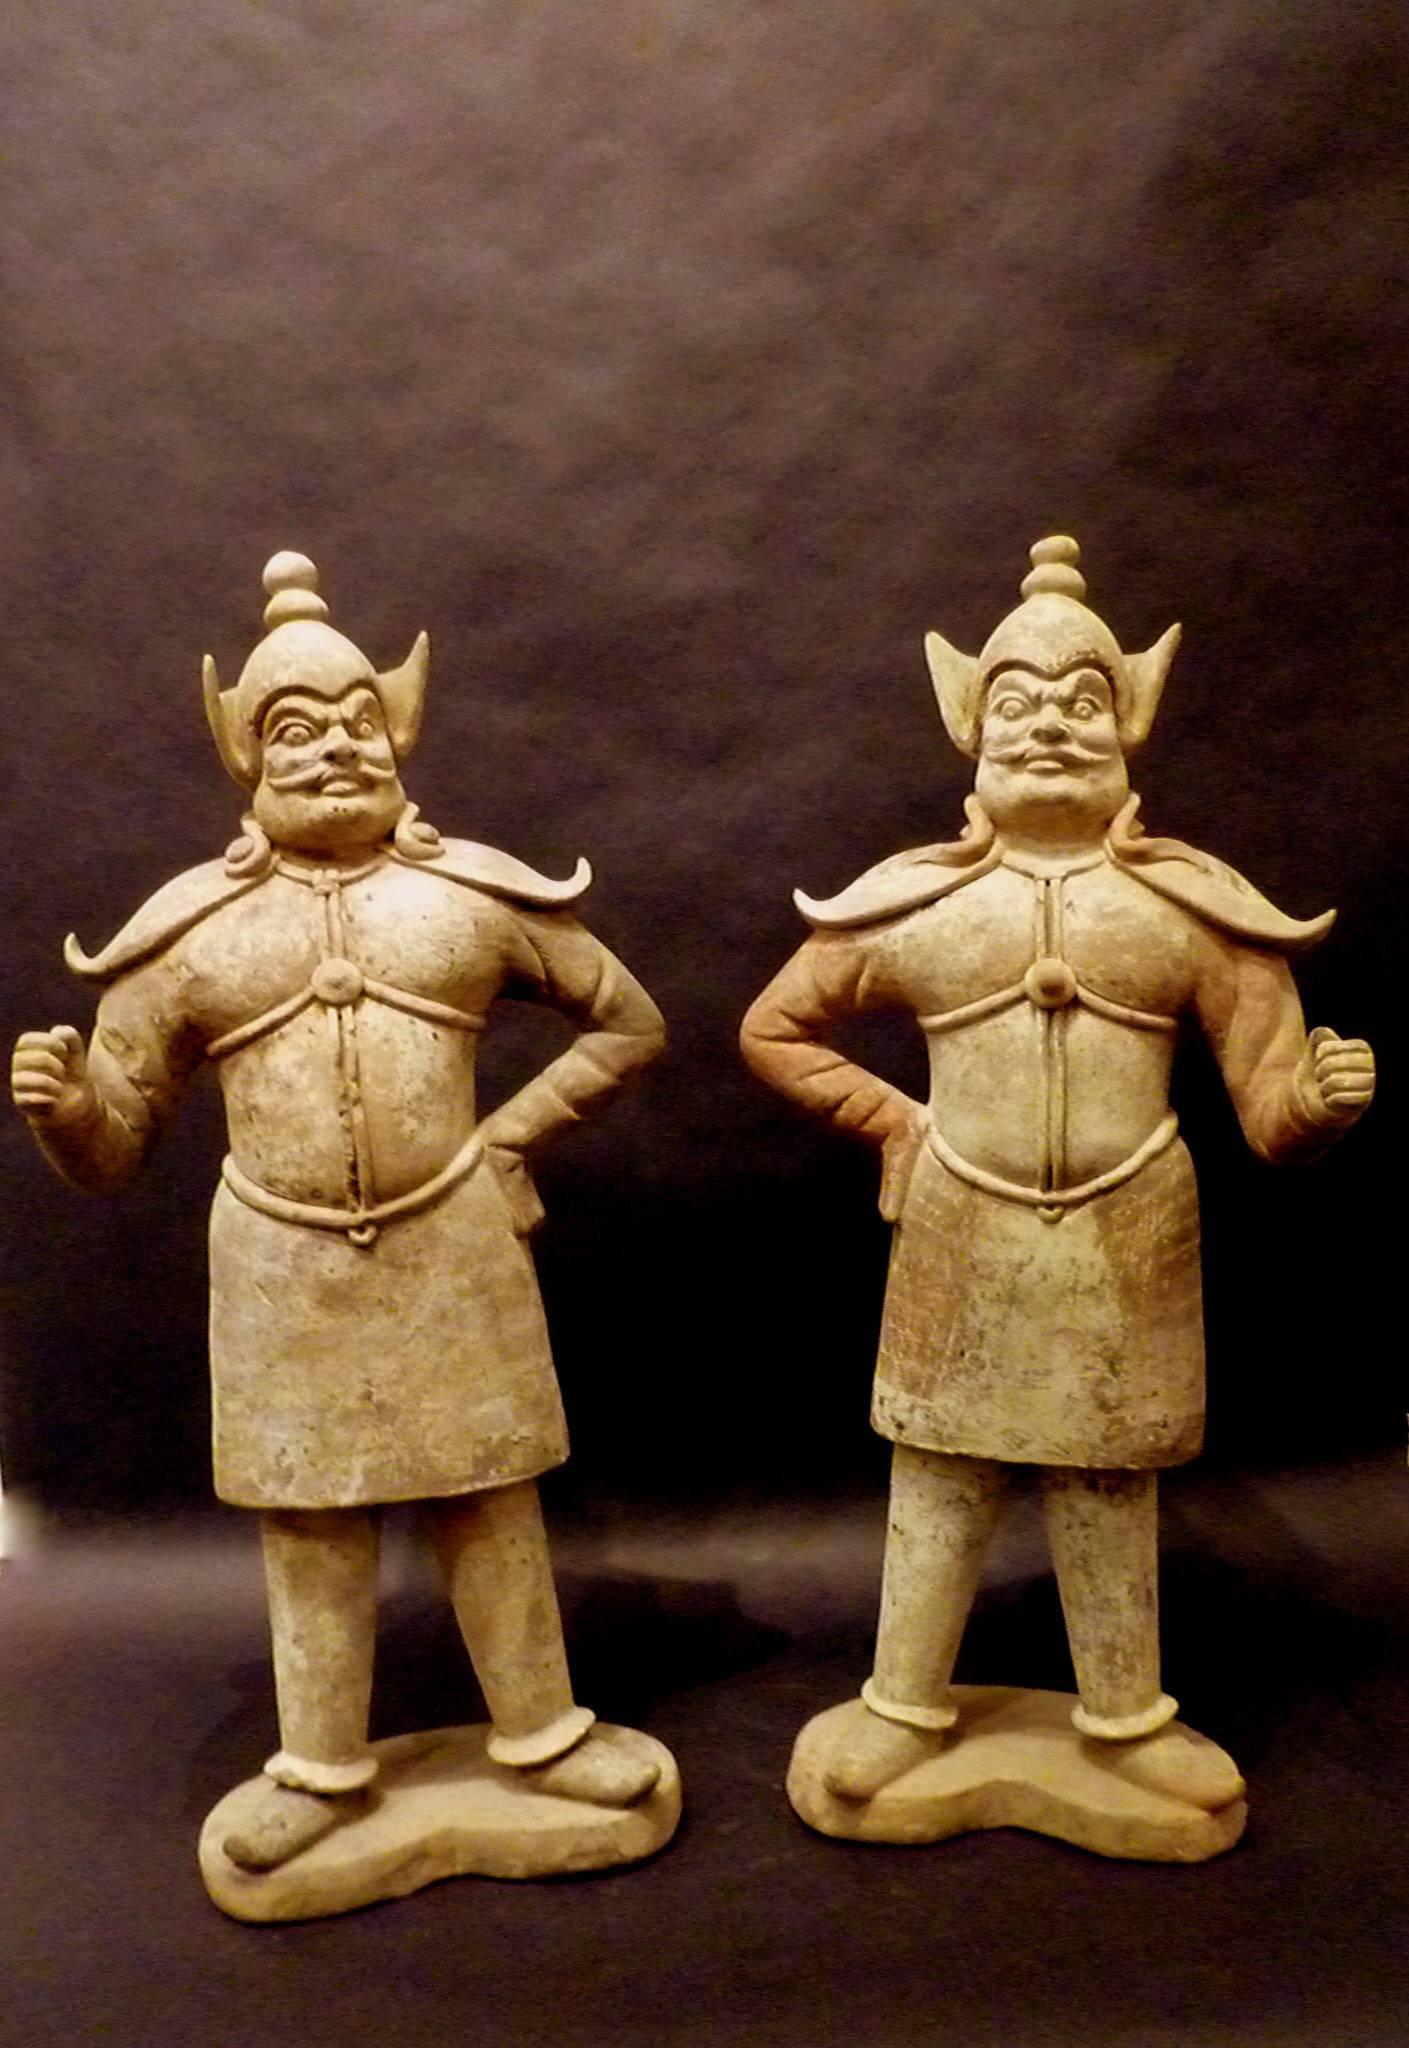 A pair of very refined standing pottery statue of guardians, dramatic facial expression, beautiful detail, early Tang dynasty 618-907, come with one Oxford authentication TL test certificate, Oxford test numbers 102s48.